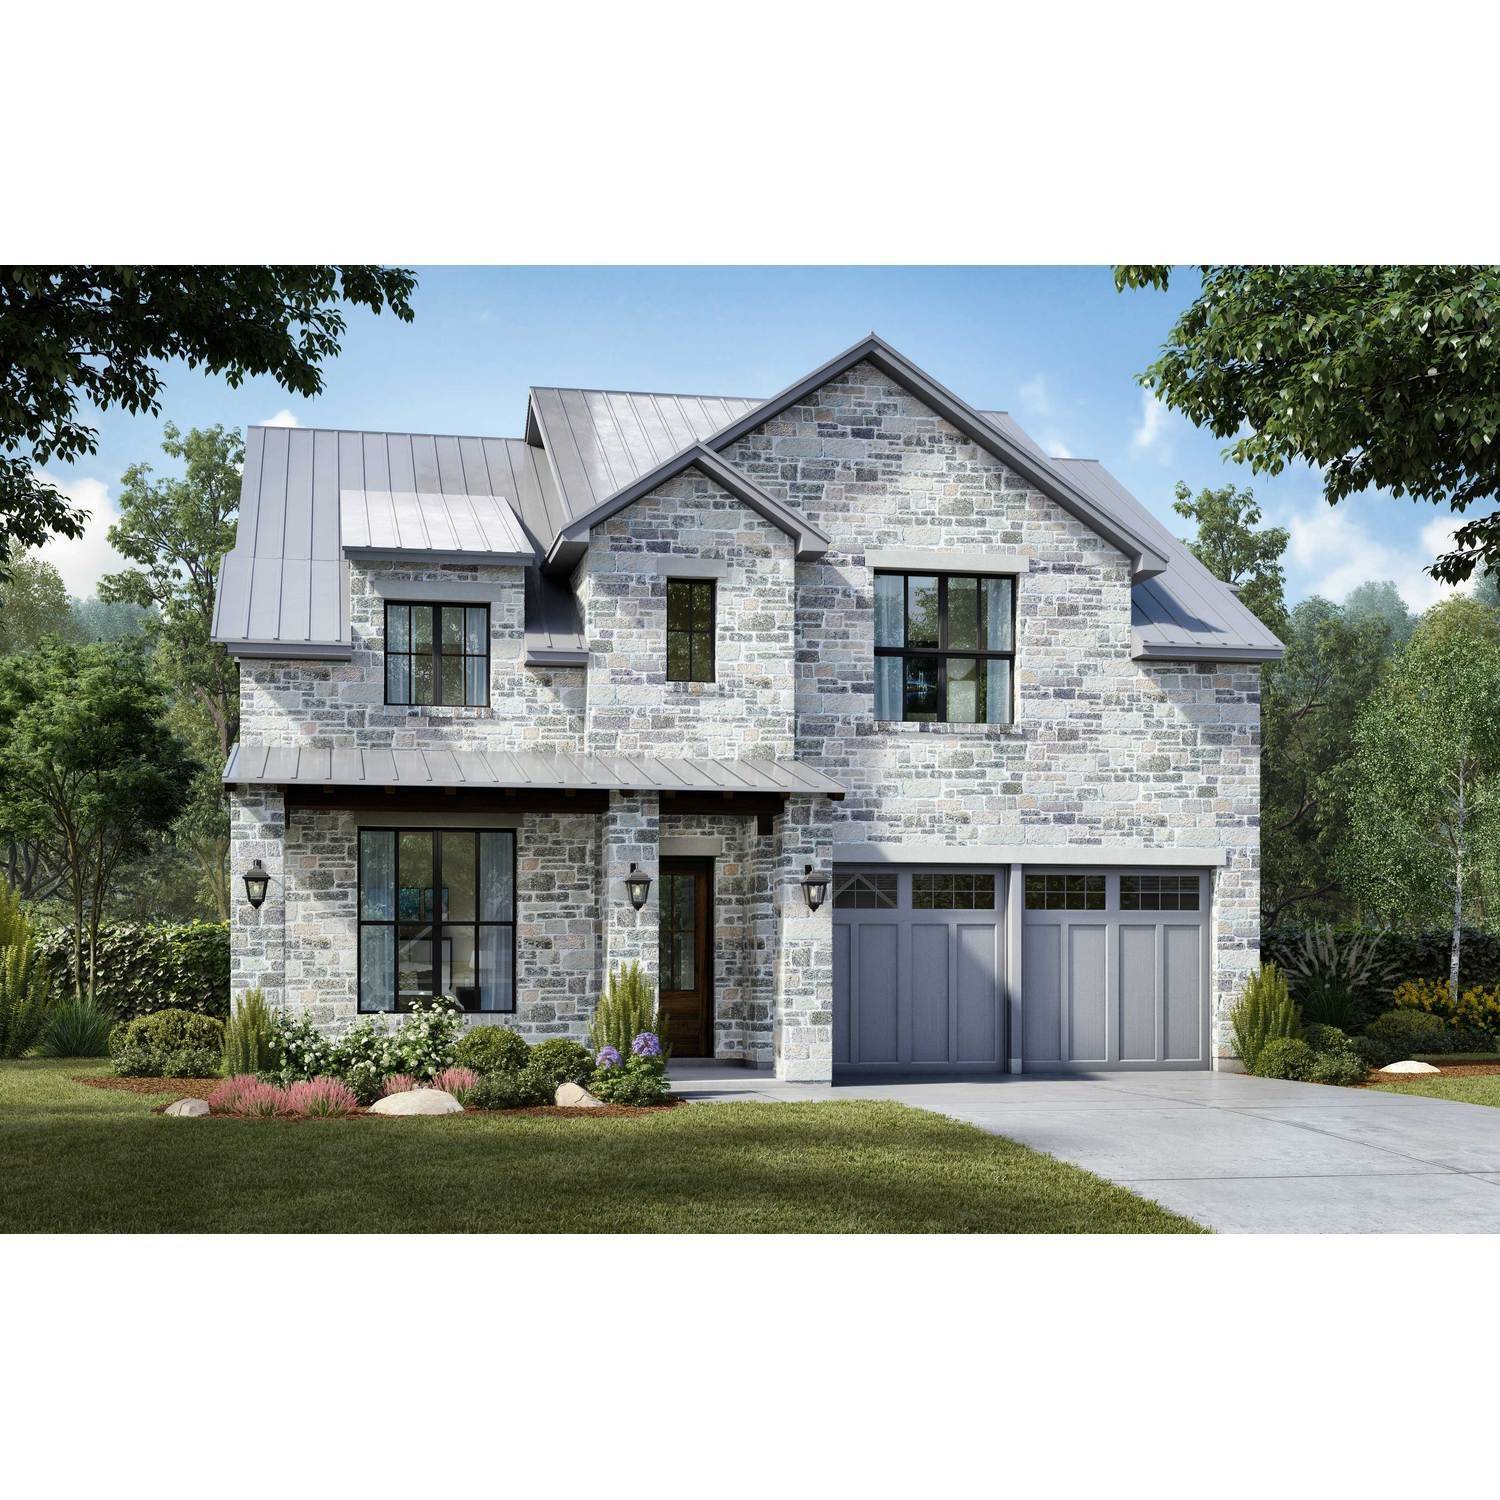 Single Family for Sale at Fields - 50' Lots Coming Soon!, Frisco, TX 75033